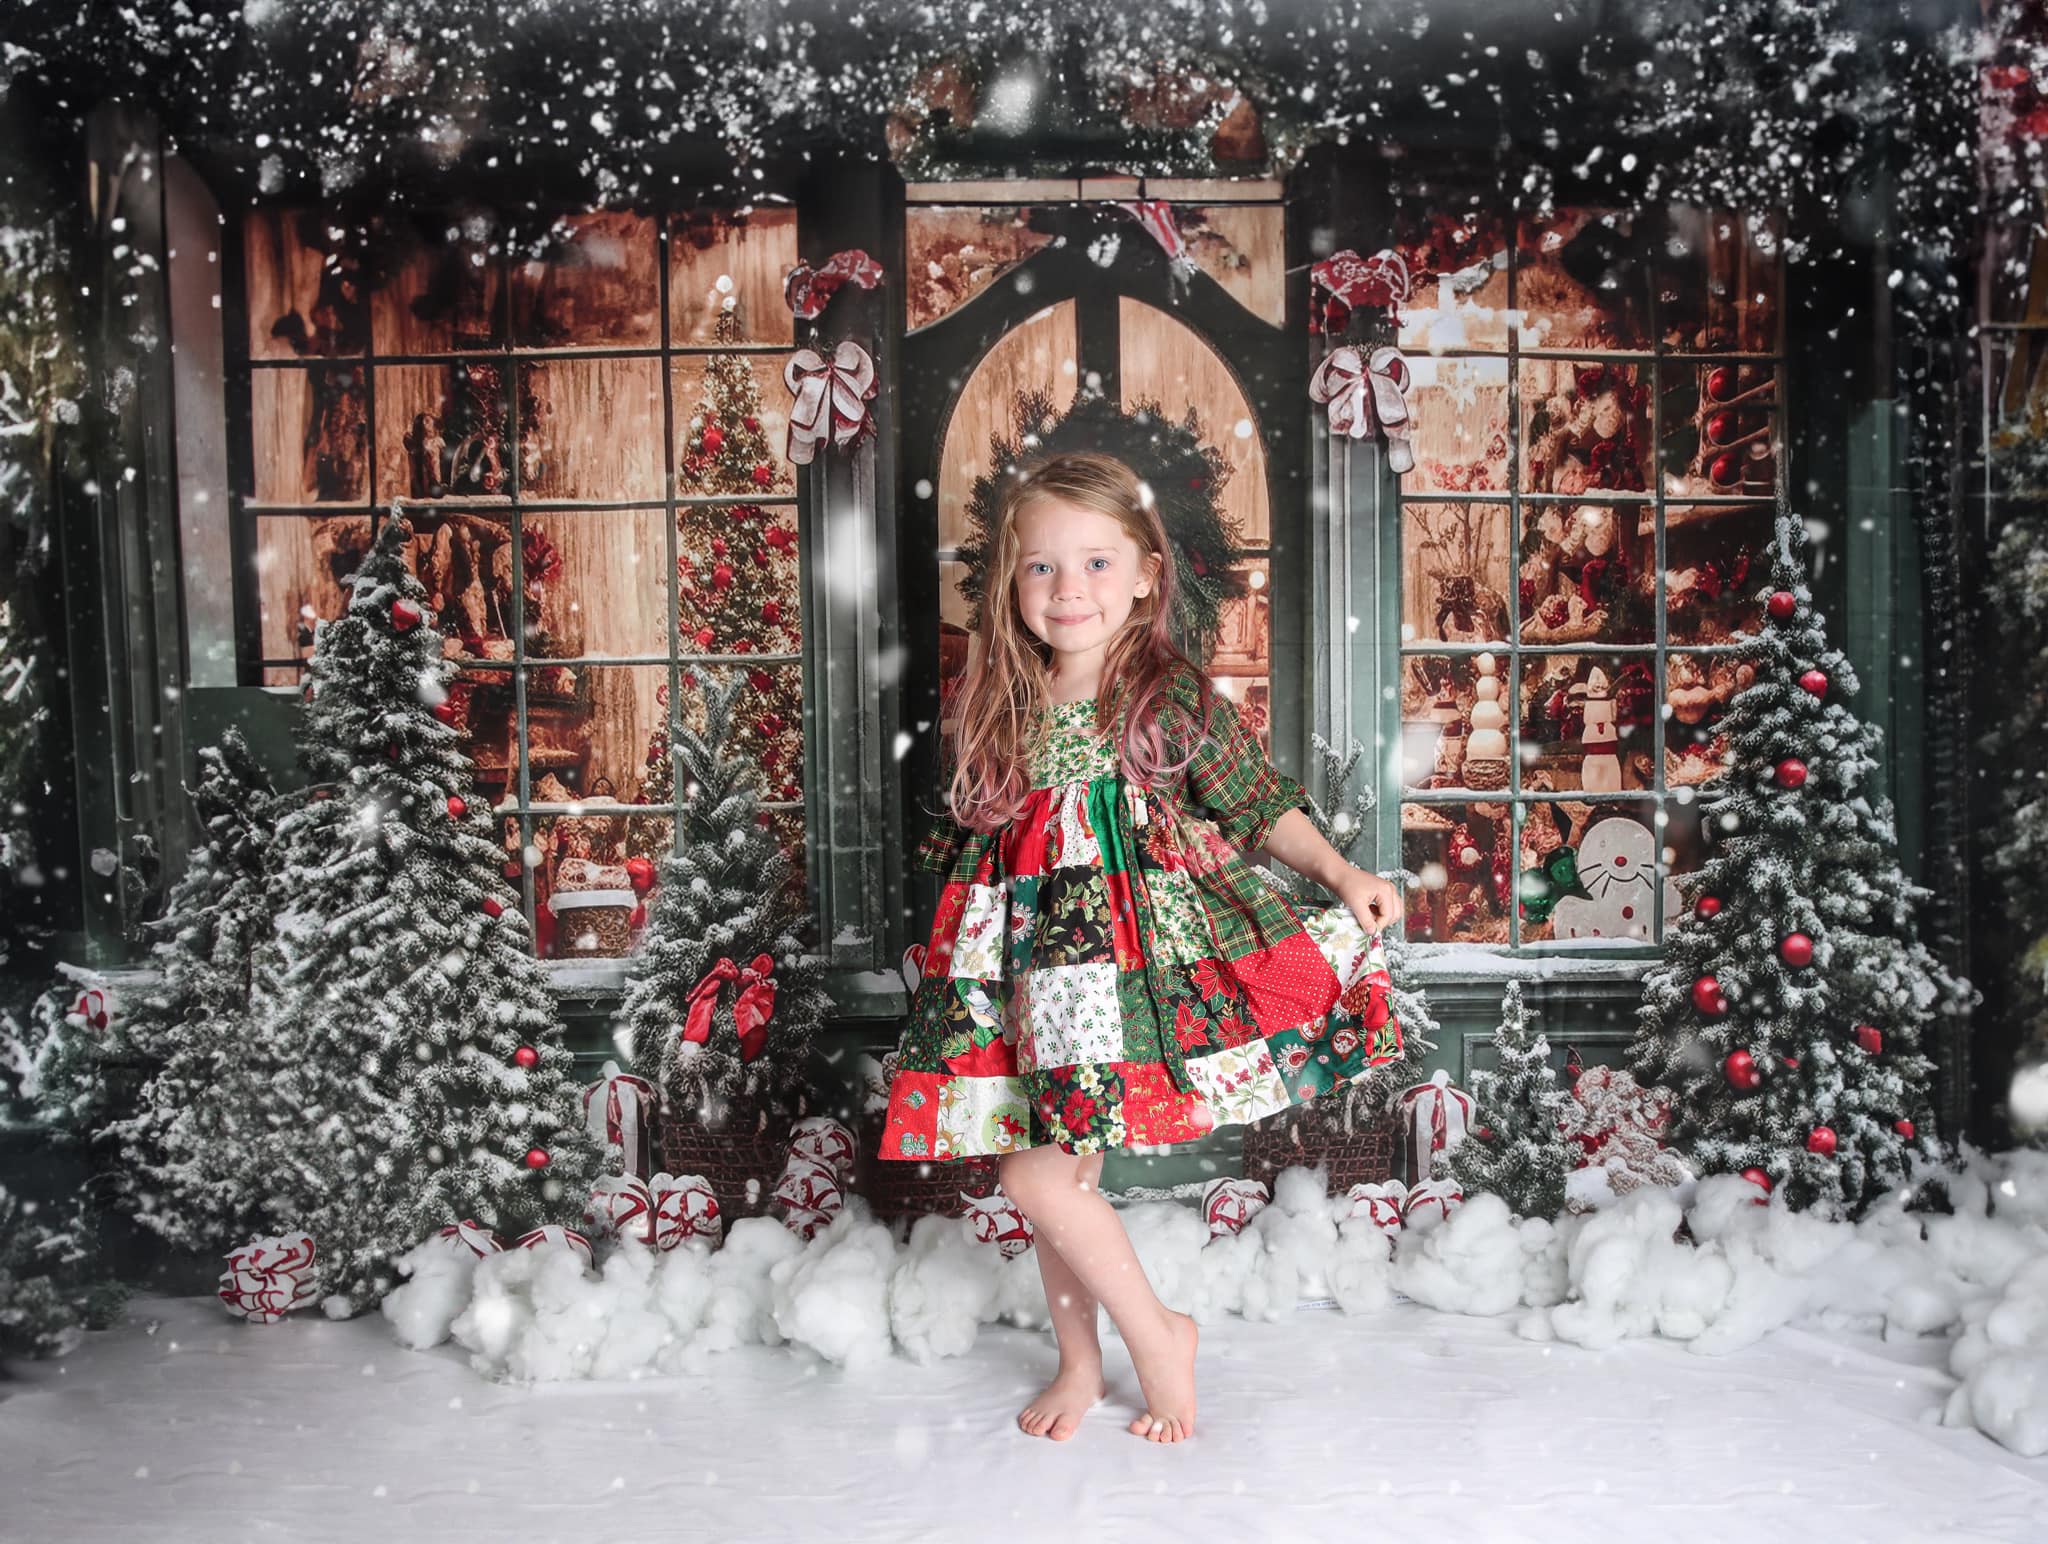 Kate Christmas Snow Cabin Backdrop for Photography